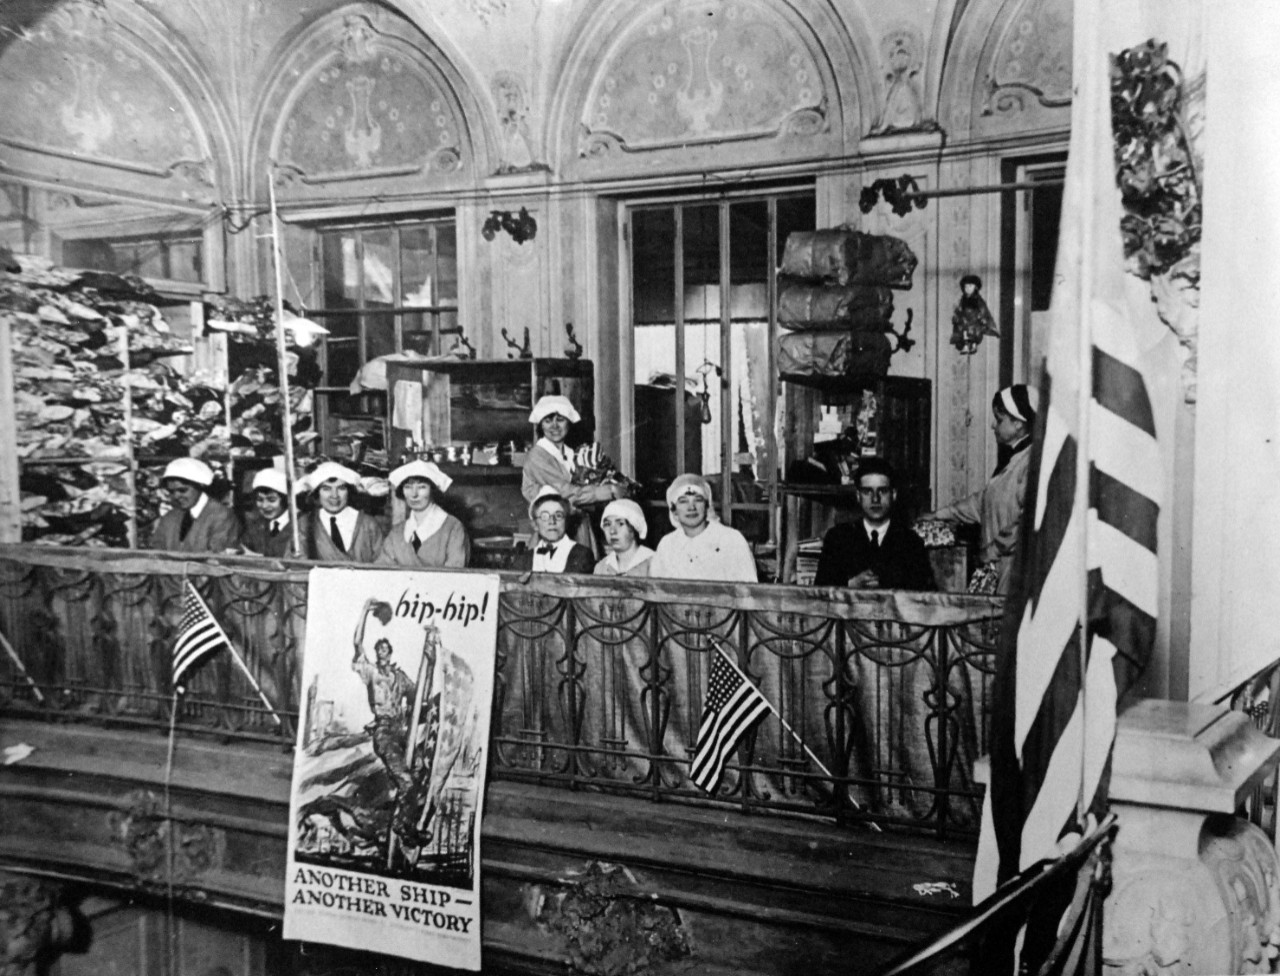 <p>165-WGZ-2L-10: Stock Room and workers pictured at the American Fund for French Wounded, Paris Depot, located at Alcazar d’Ete, Champs-Elysees, 1918. Note the recruiting poster at bottom left. U.S. War Department photograph, now in the collections of the National Archives. (2014/8/27).</p>
